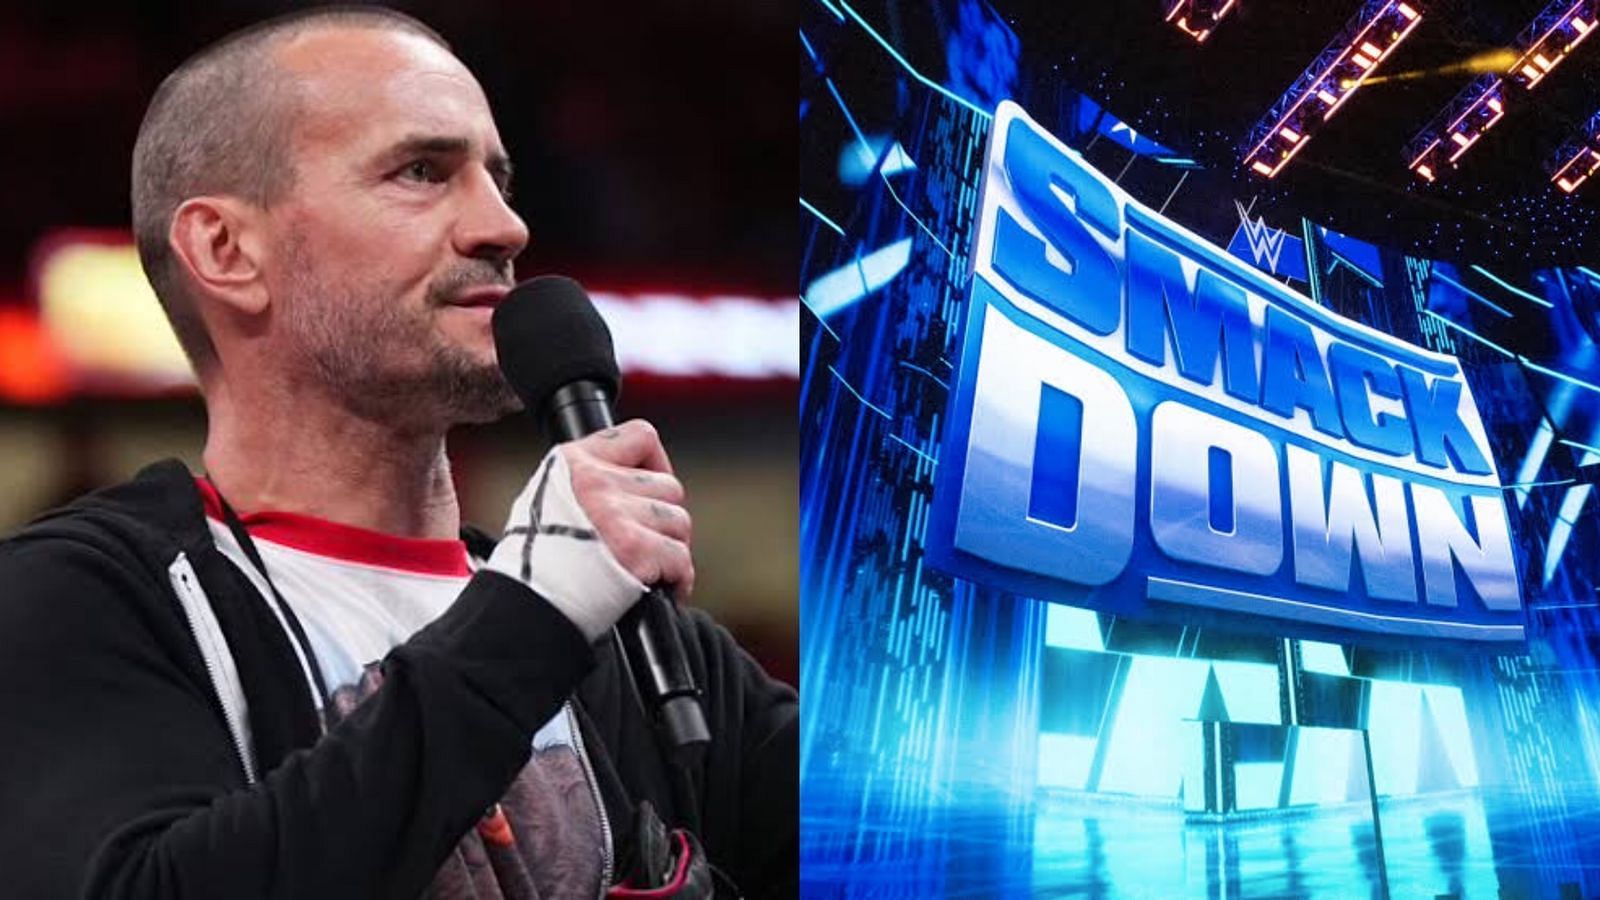 CM Punk was recently let go by AEW